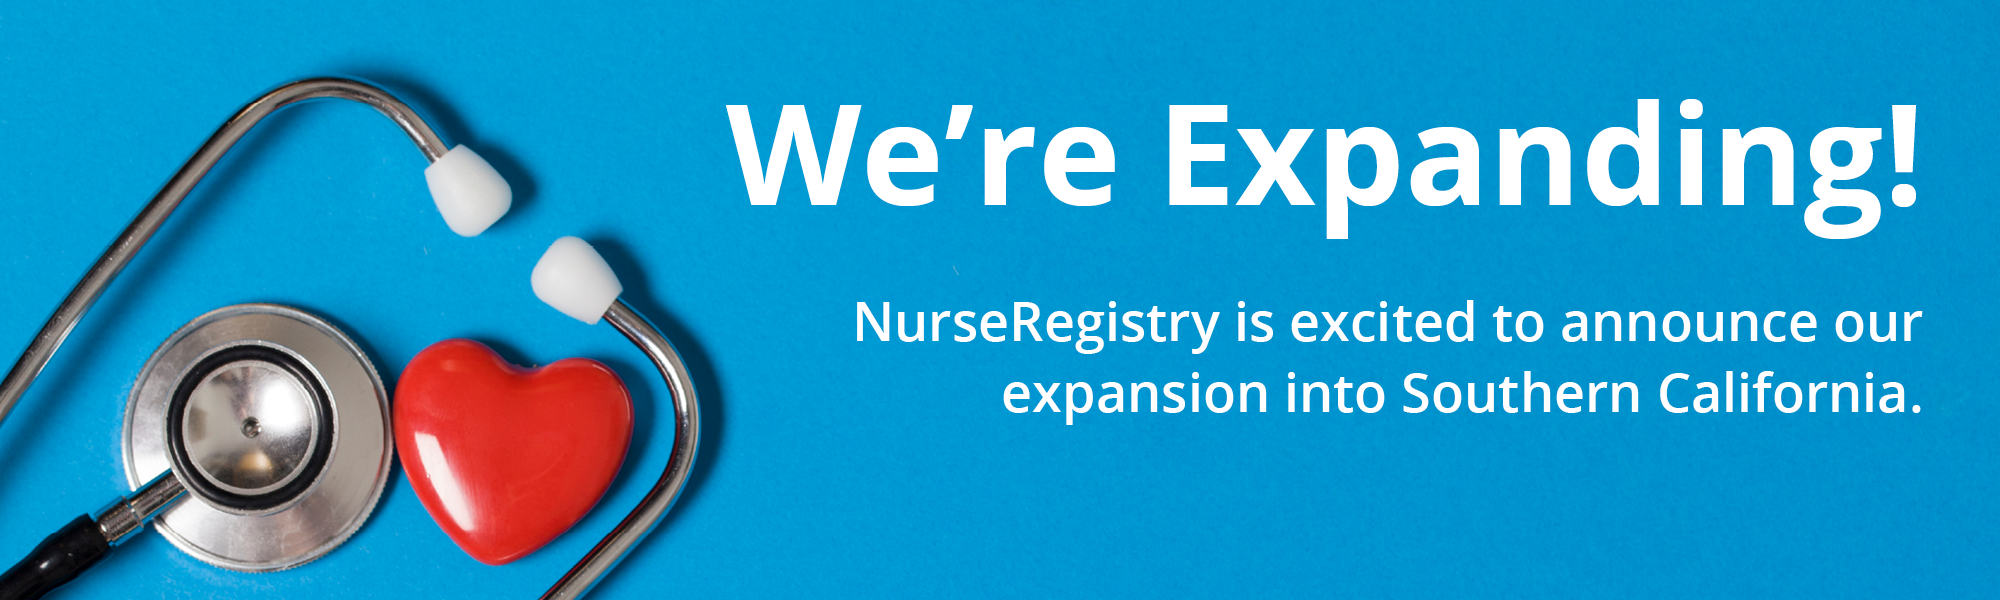 nurseregistry expanding to southern california